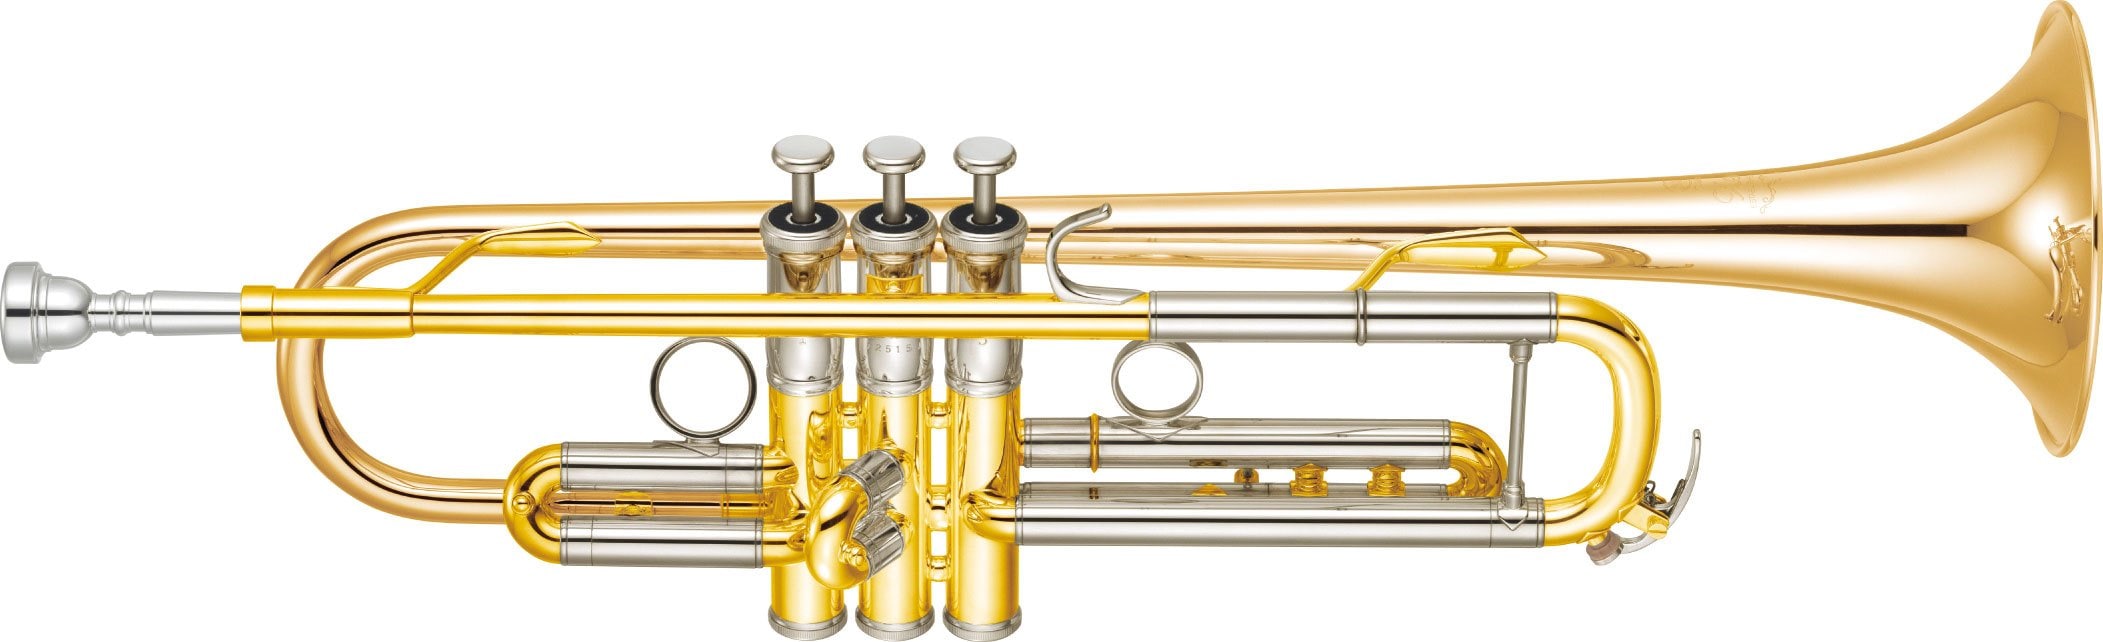 YTR-8335RS - Overview - Bb Trumpets - Trumpets - Brass